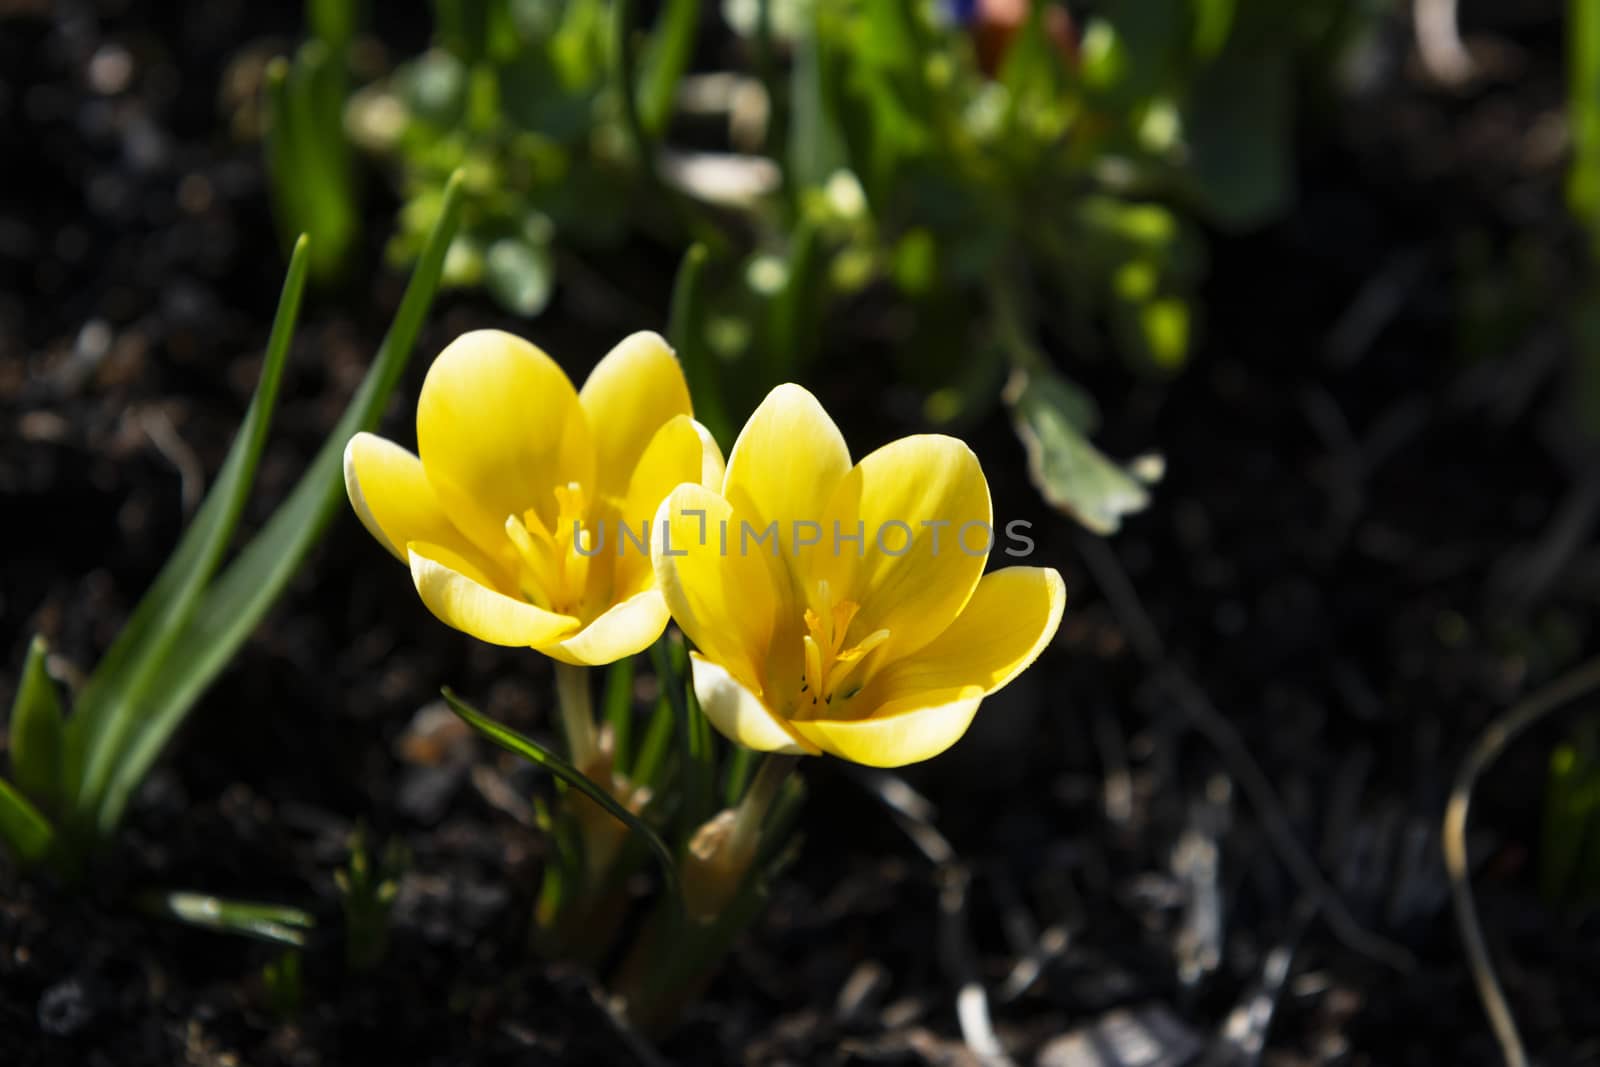 Two small yellow crocuses caught in sunlight in a shaded flower bed